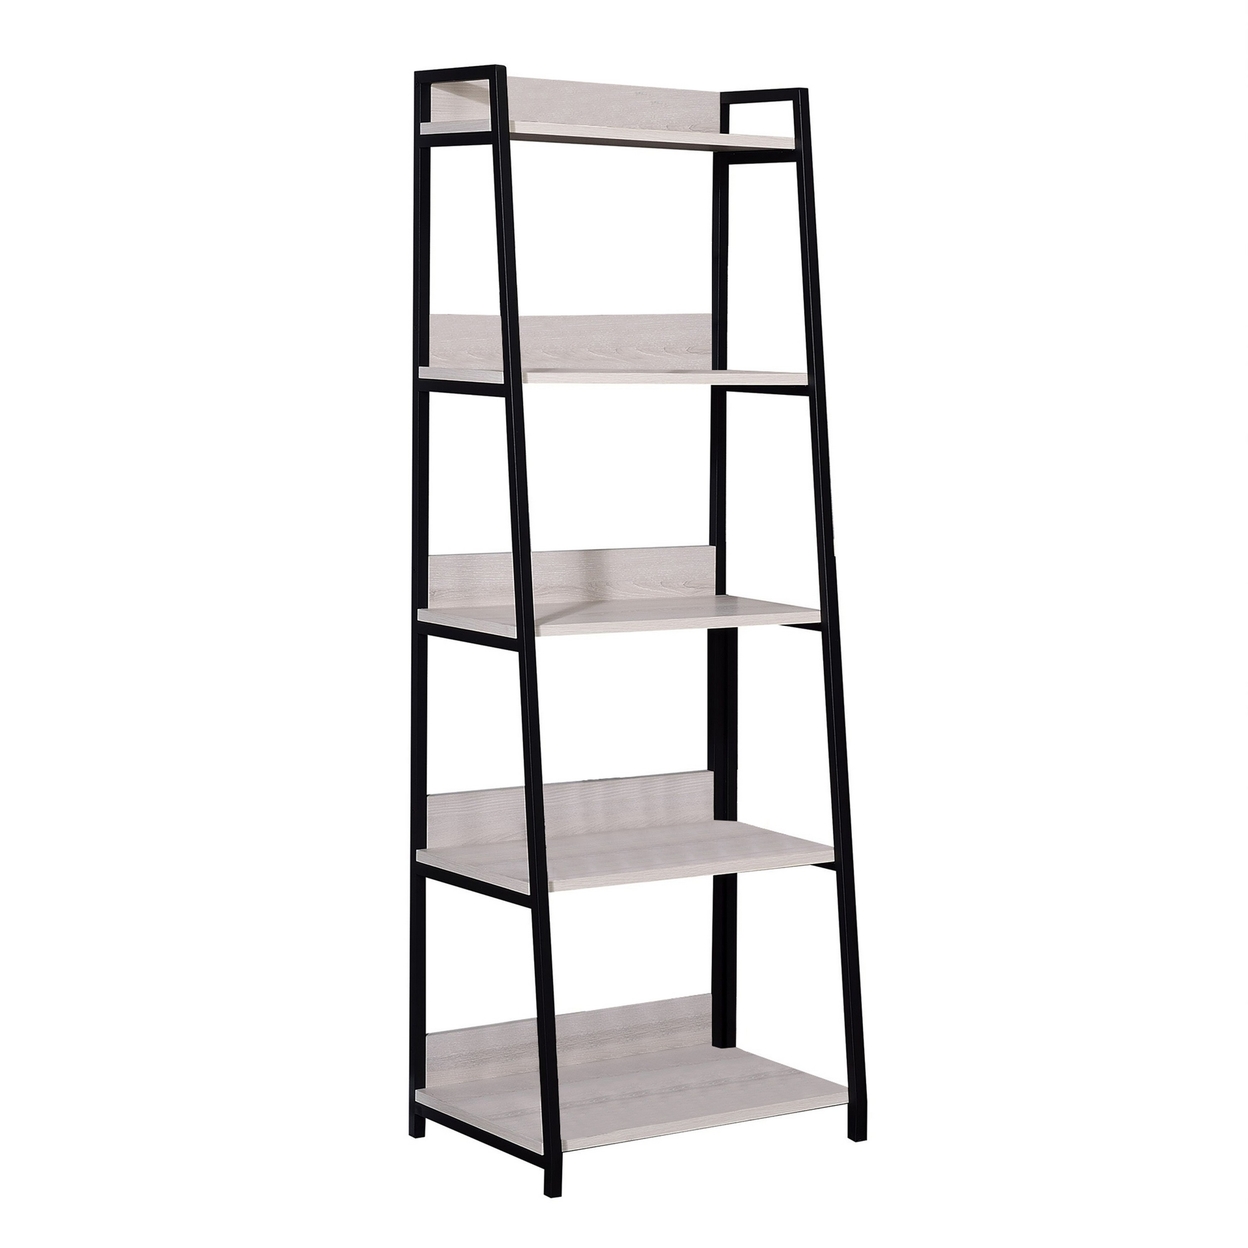 Wooden Bookshelf With 5 Open Compartments, Washed White And Black- Saltoro Sherpi